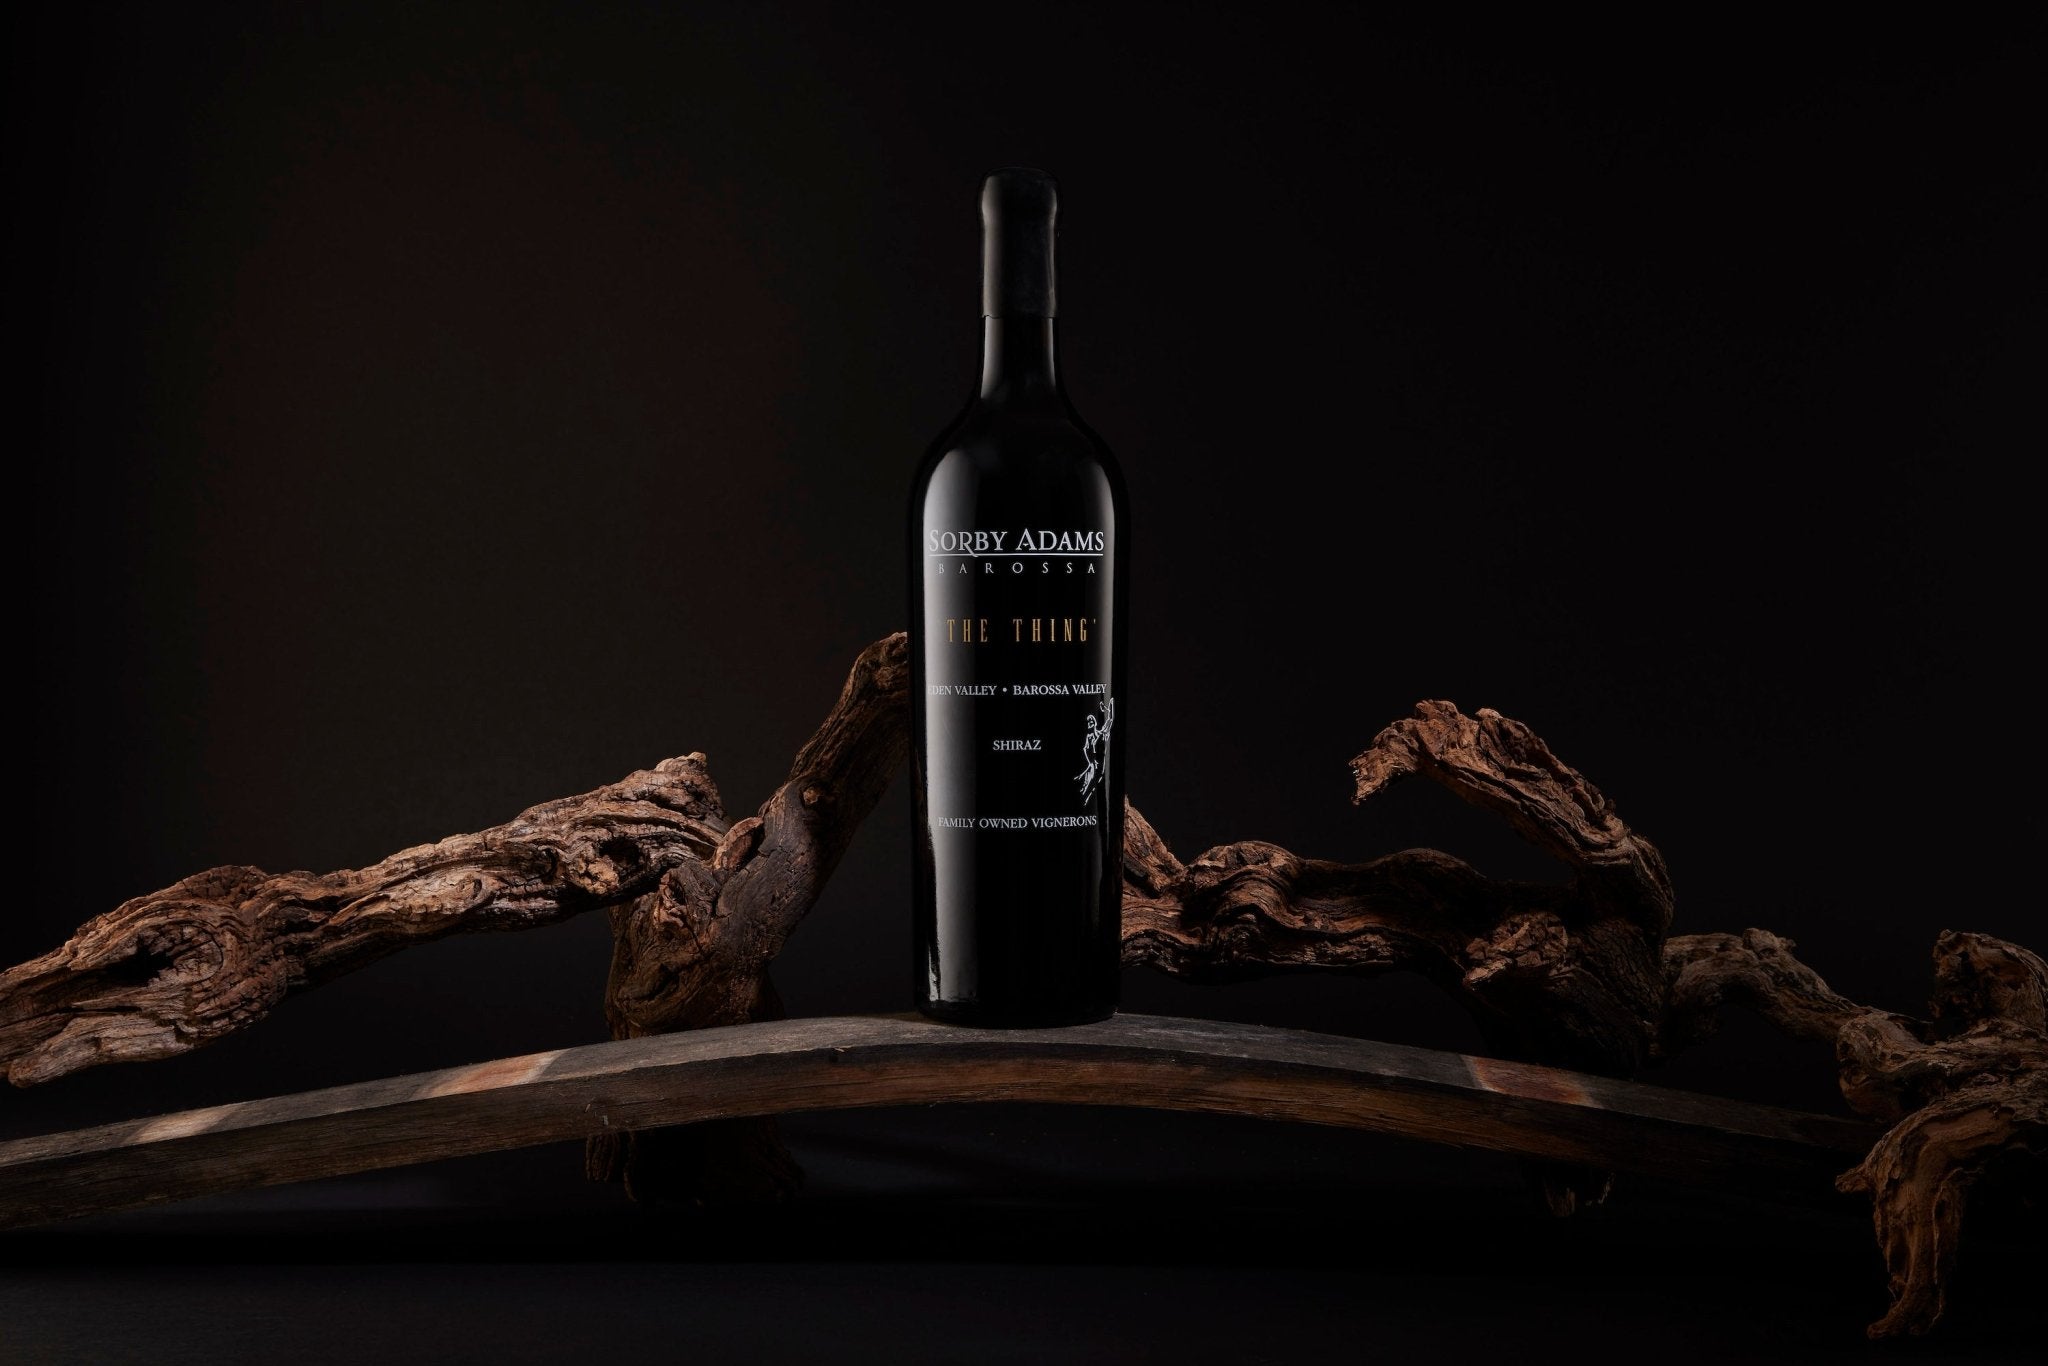 VIP The Thing – Sorby Adams Wines